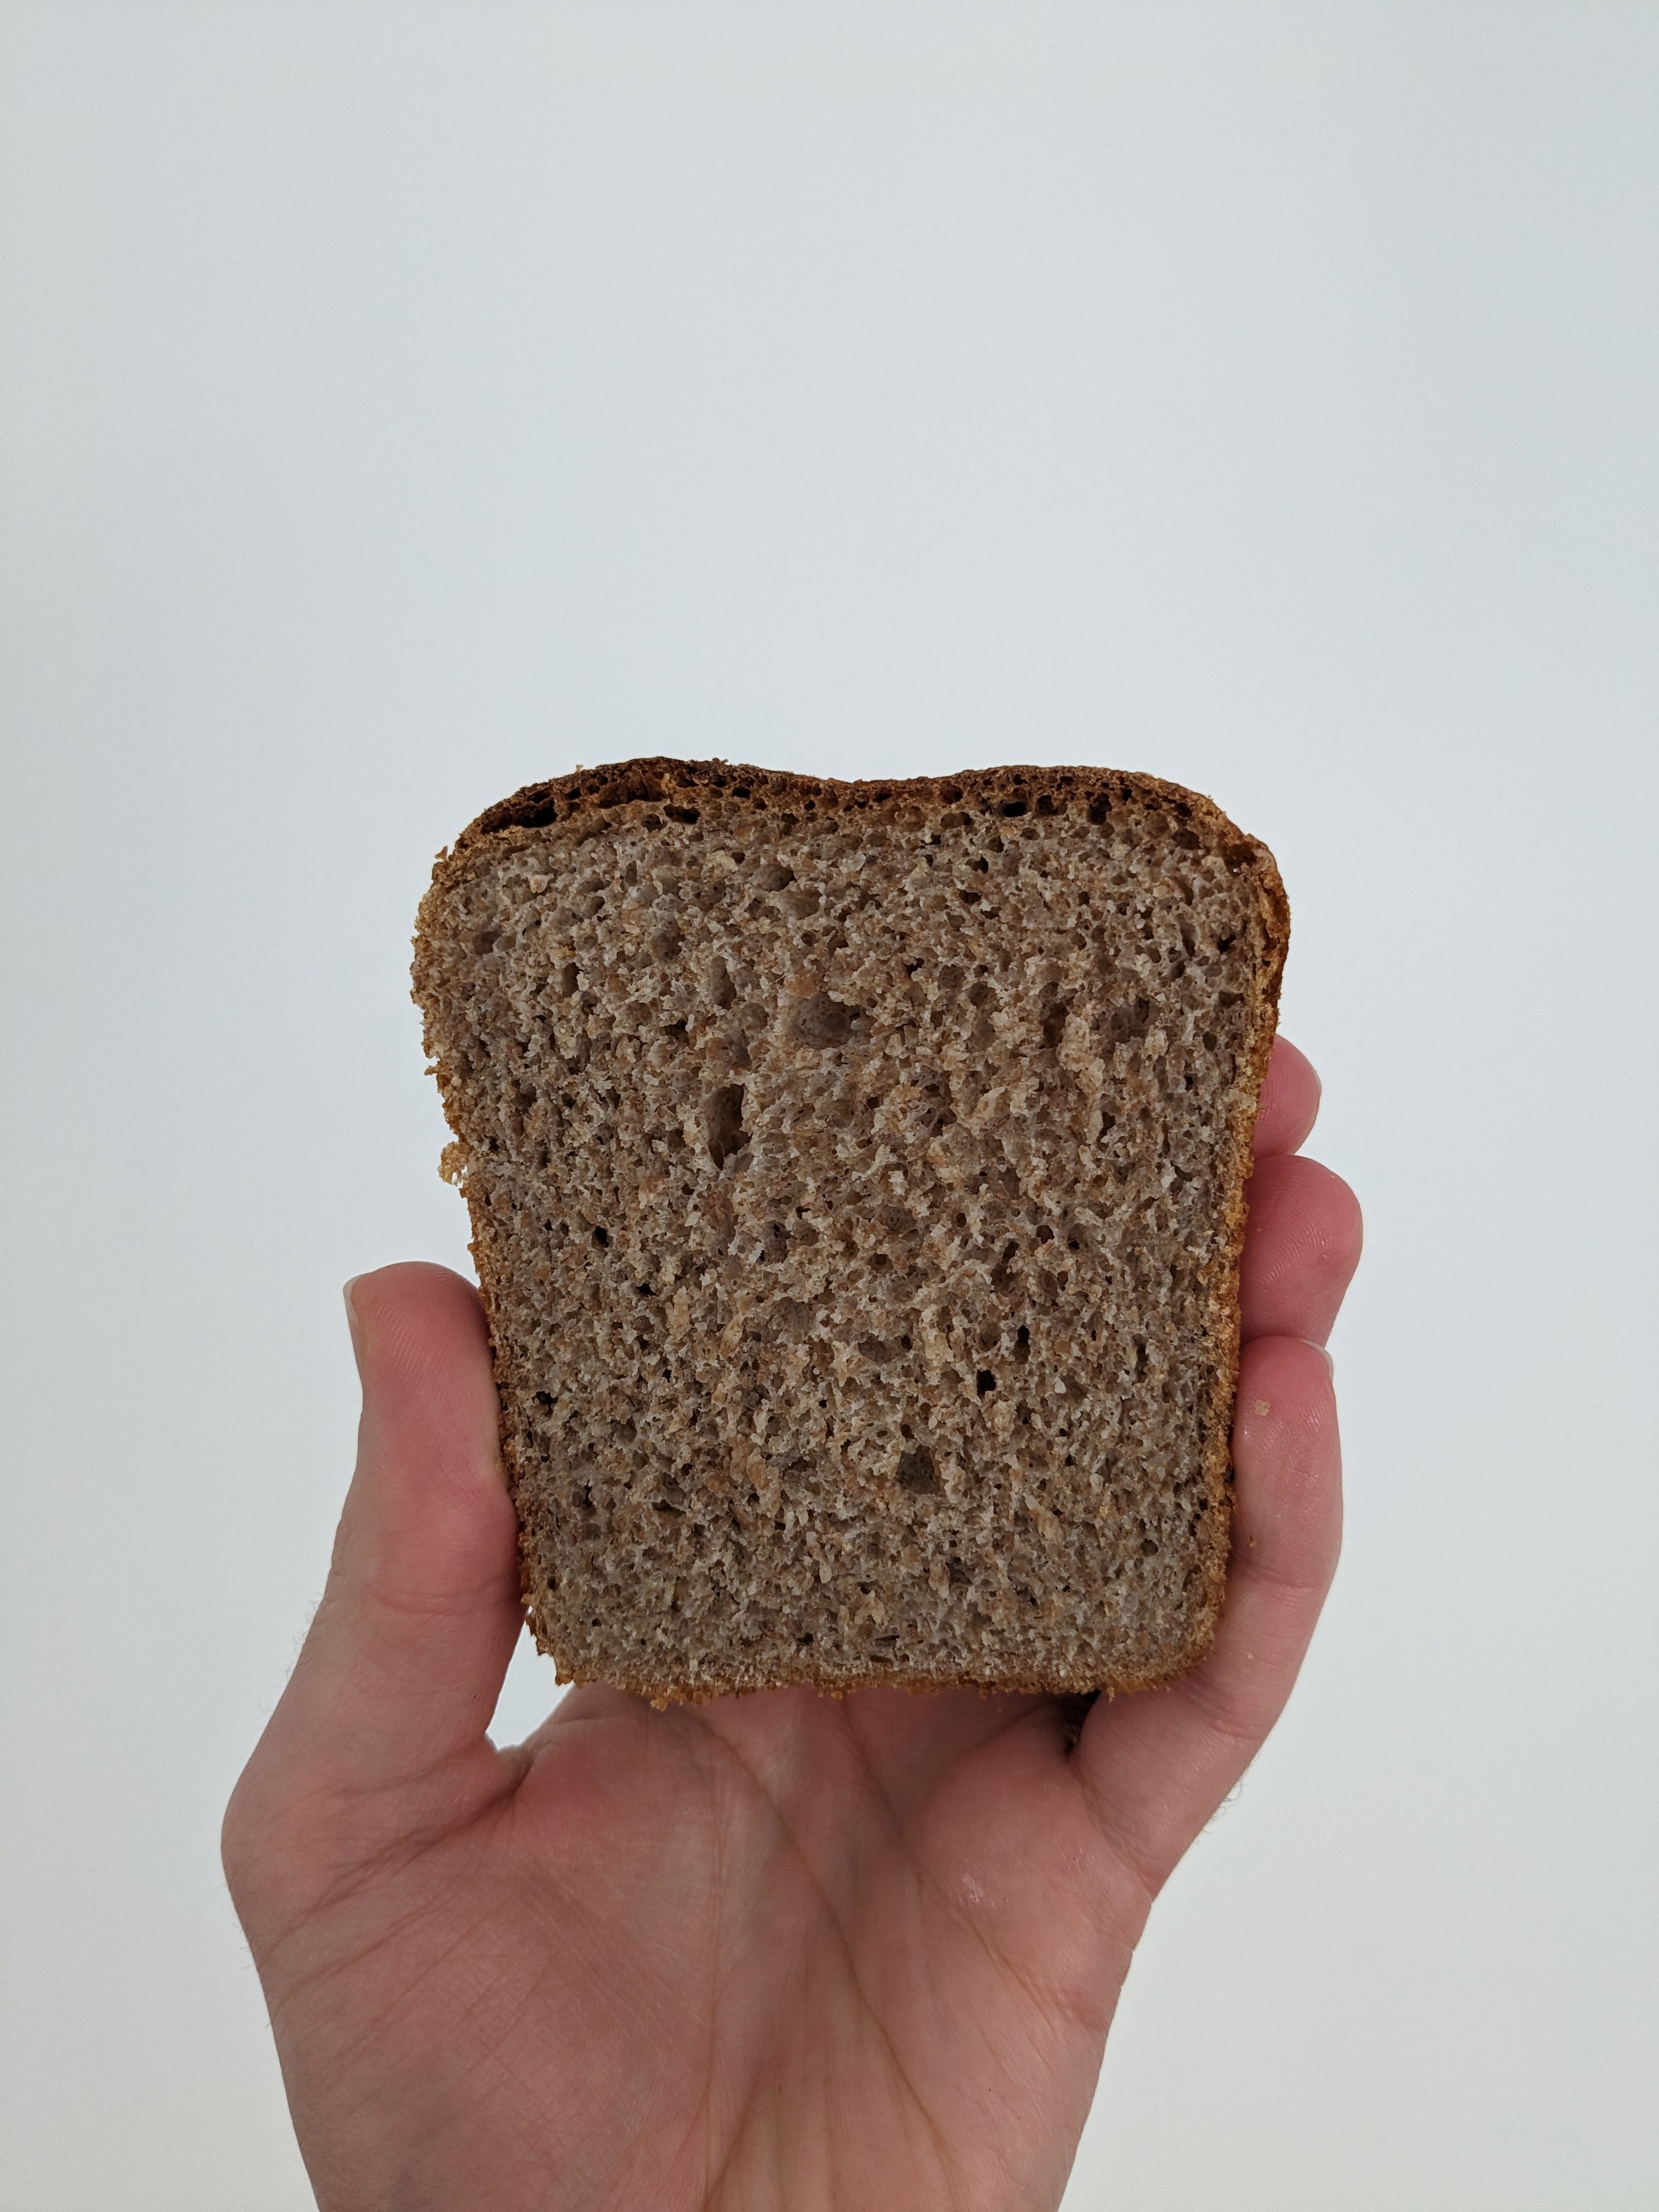 A slice of the bread